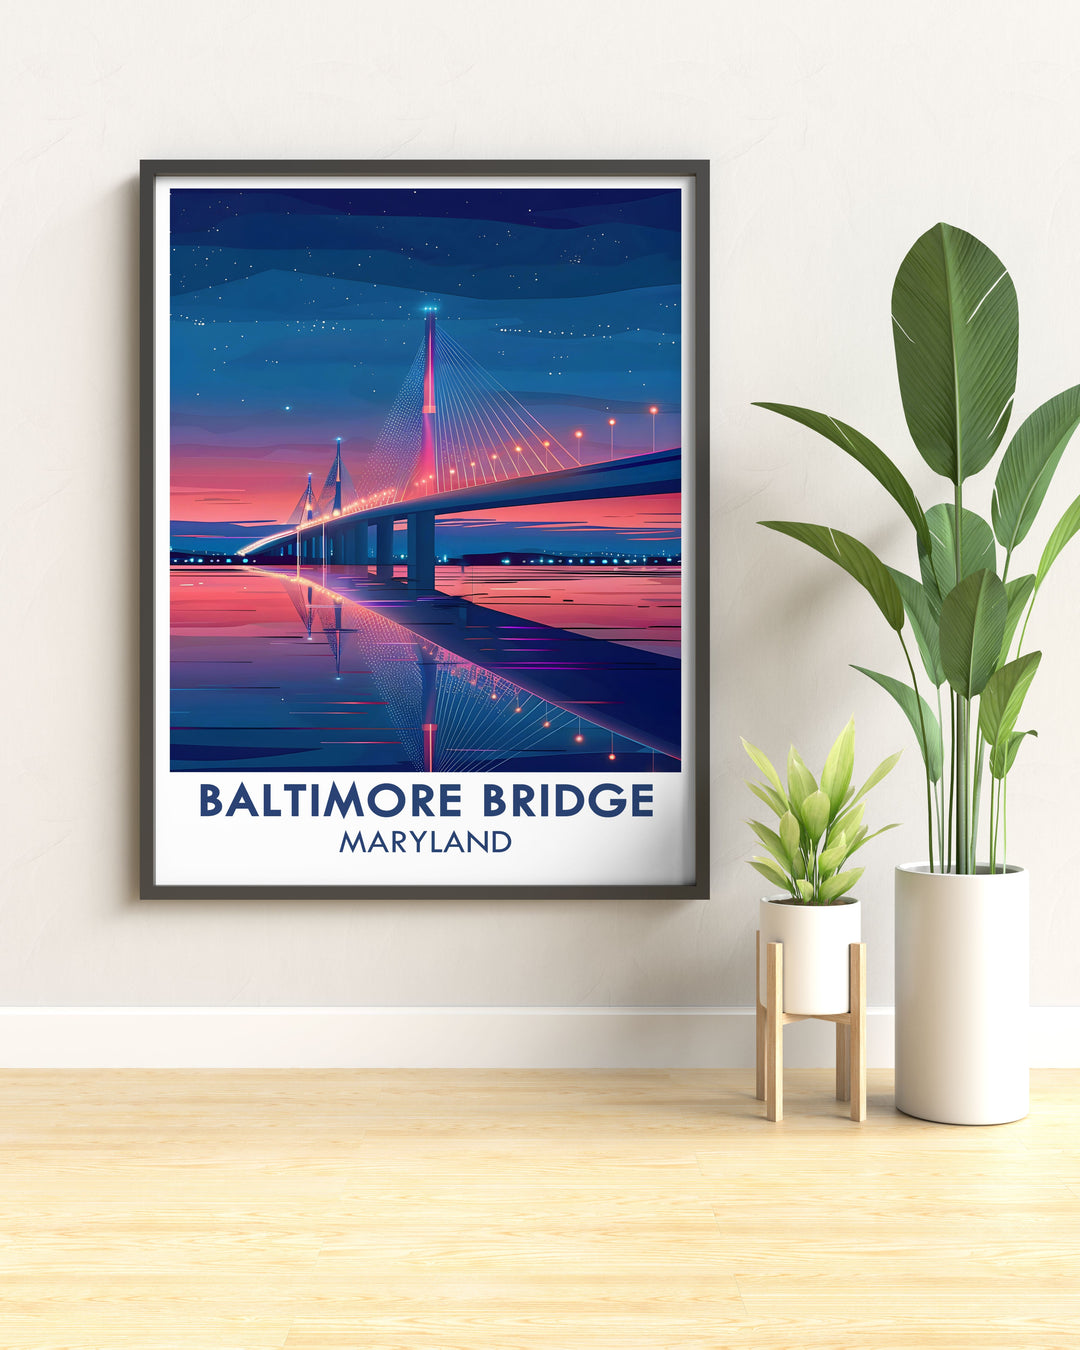 Elegant Baltimore wall art featuring the new Key Bridge design. The artwork's detailed depiction adds a touch of sophistication to any space. Ideal for housewarming gifts and Maryland art enthusiasts.